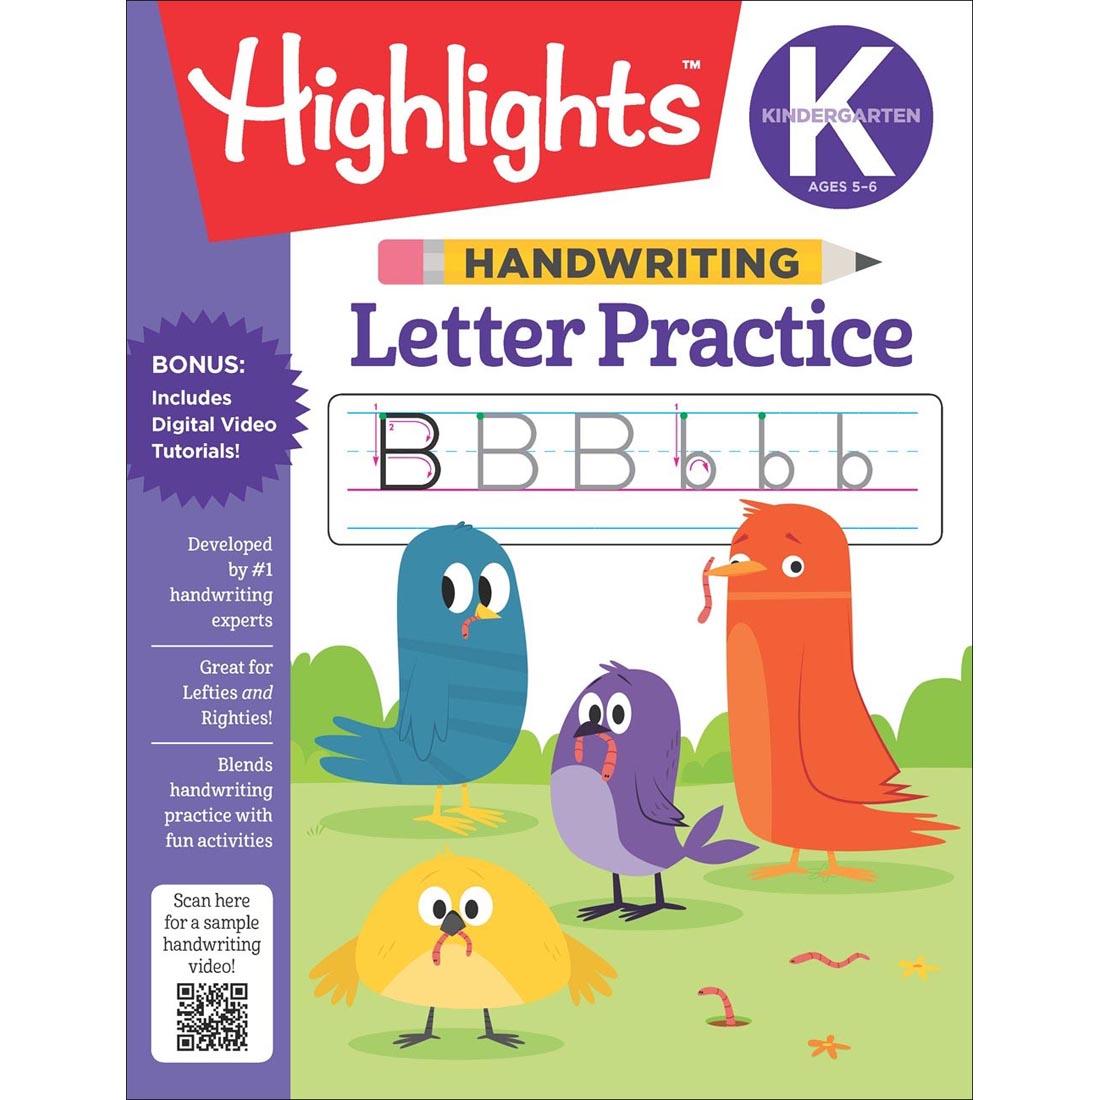 Highlights Handwriting Letter Practice Pad